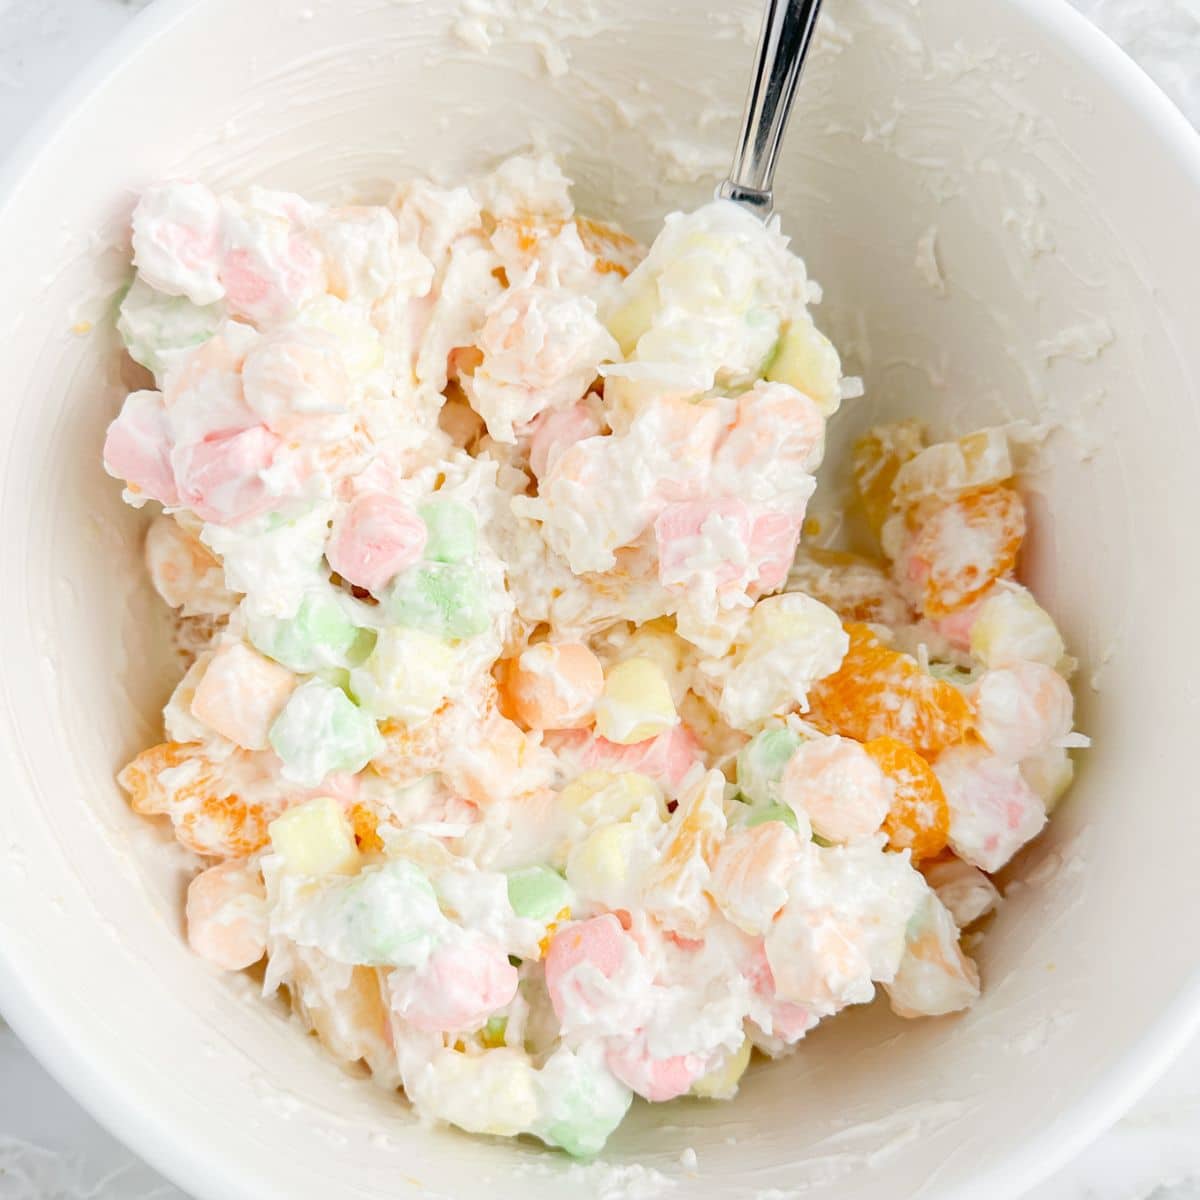 Bowl with a fruit salad made with colorful marshmallows, shredded coconut, and fruit. 